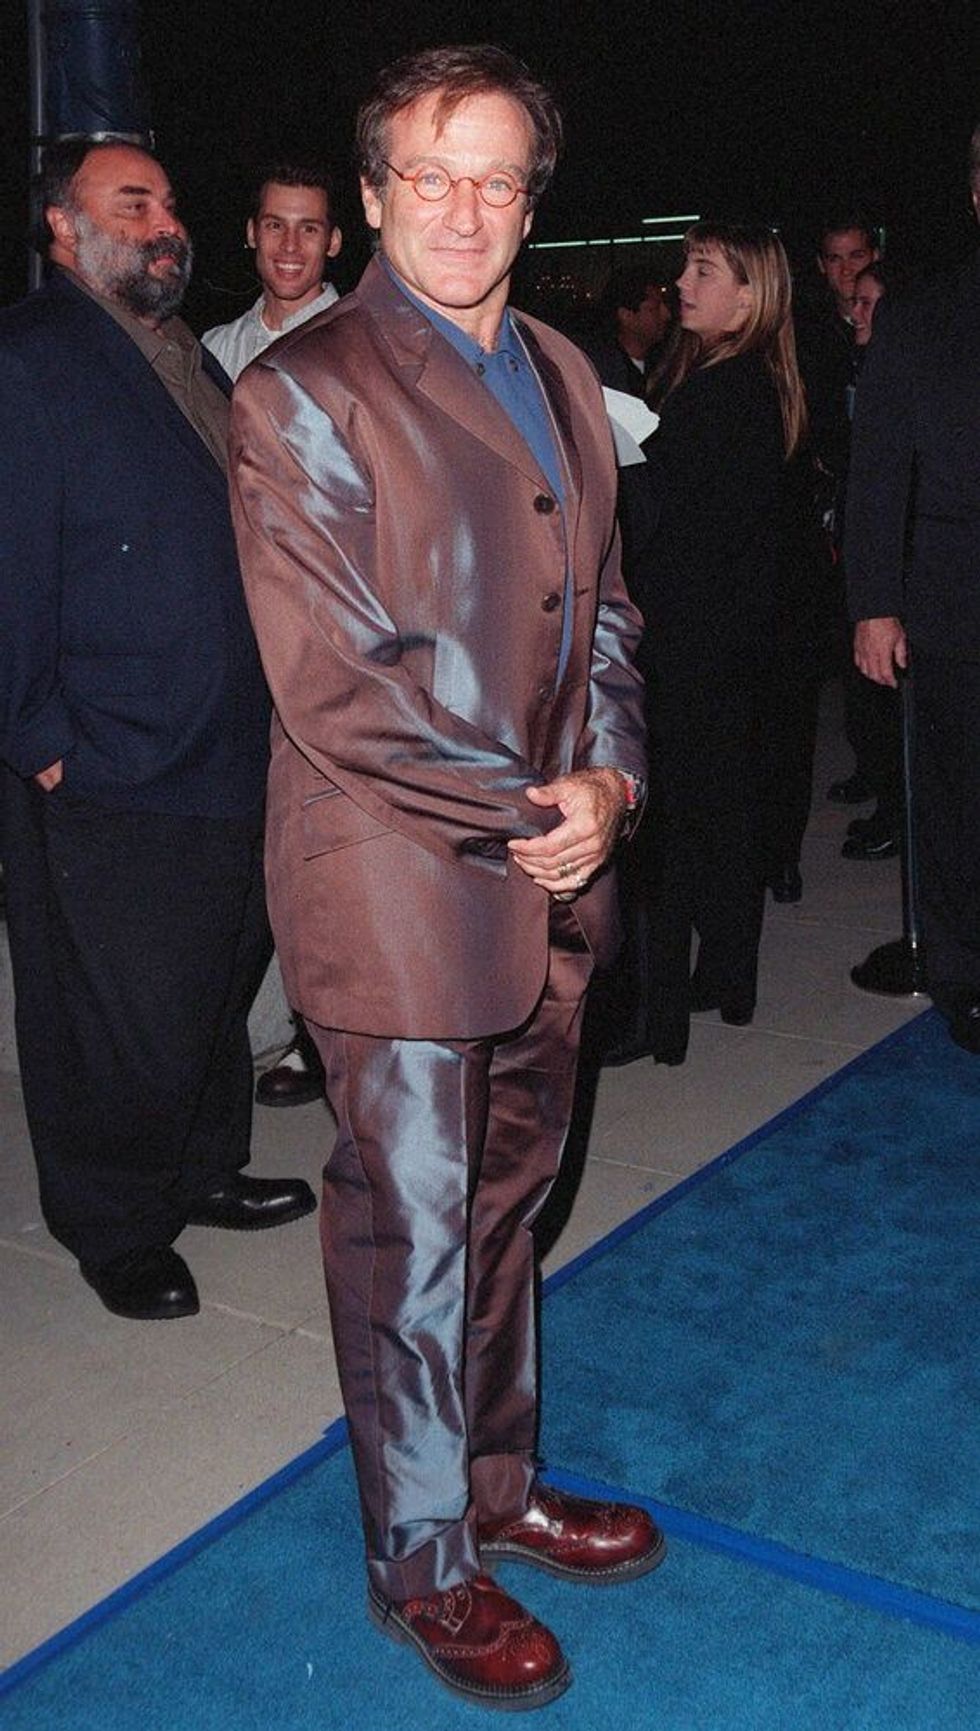 Actor ROBIN WILLIAMS at the Beverly Hills premiere of "What Dreams May Come" in which he stars with Cuba Gooding Jr. and Annabella Sciorra.